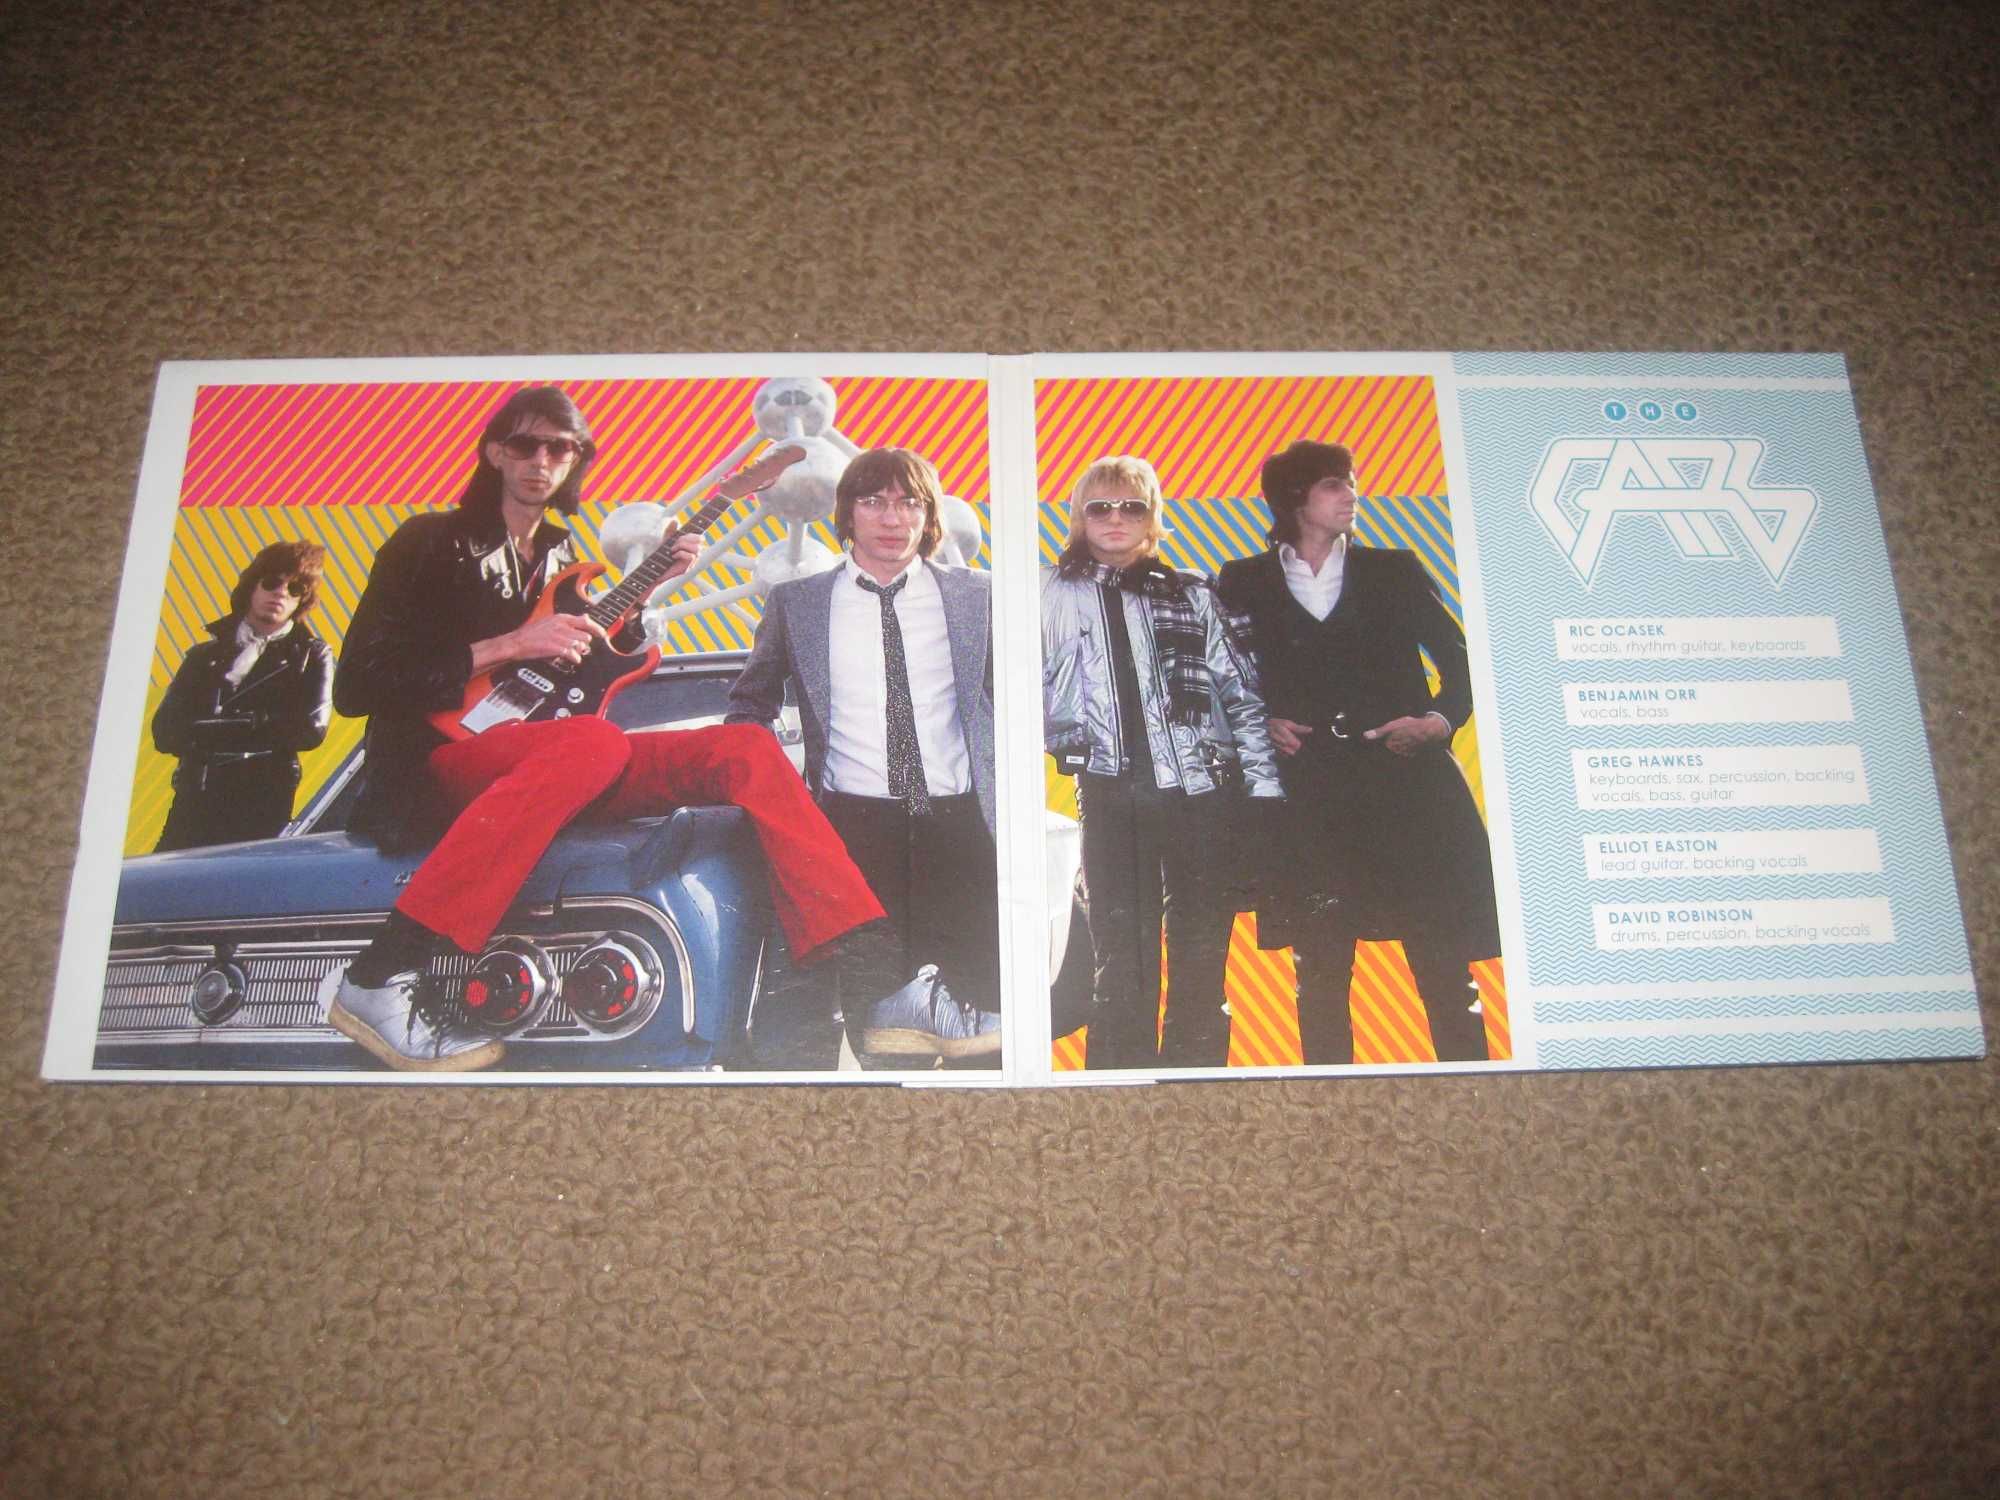 CD dos The Cars "Moving In Stereo: The Best Of The Cars" Digipack!